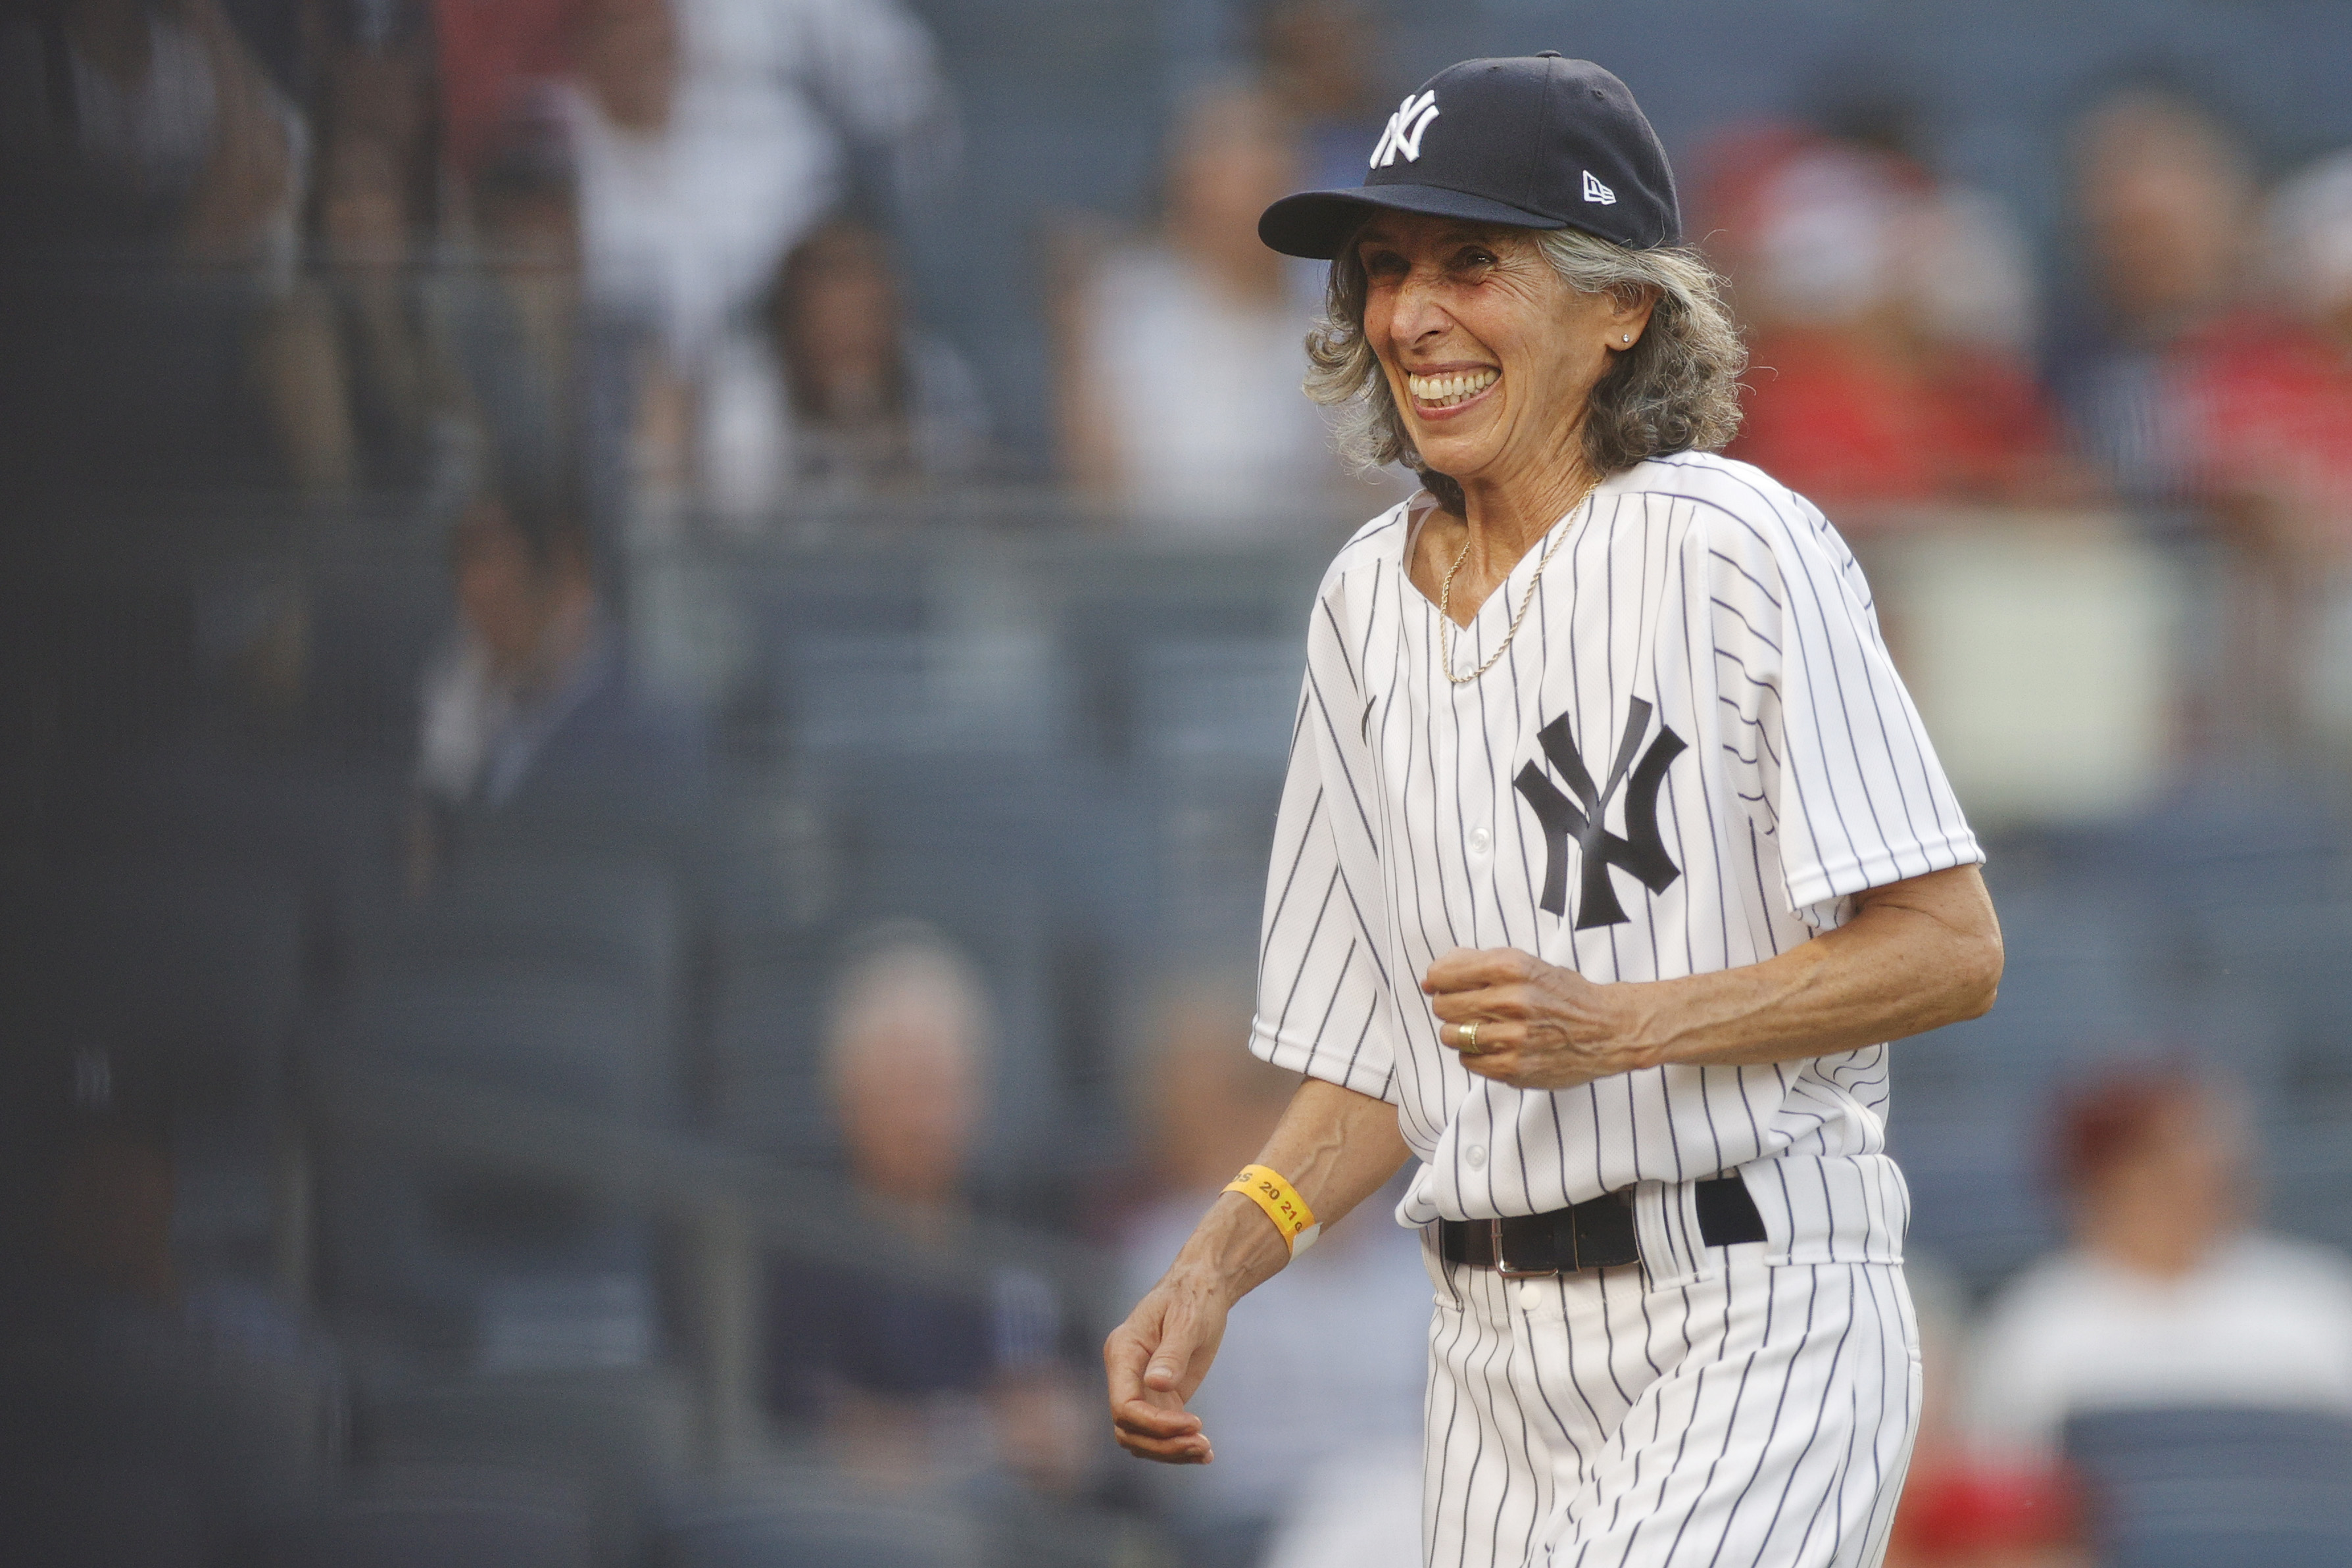 Video: Gwen Goldman Reacts to Fulfilling 60-Year-Old Dream of Being Yankees Bat Girl